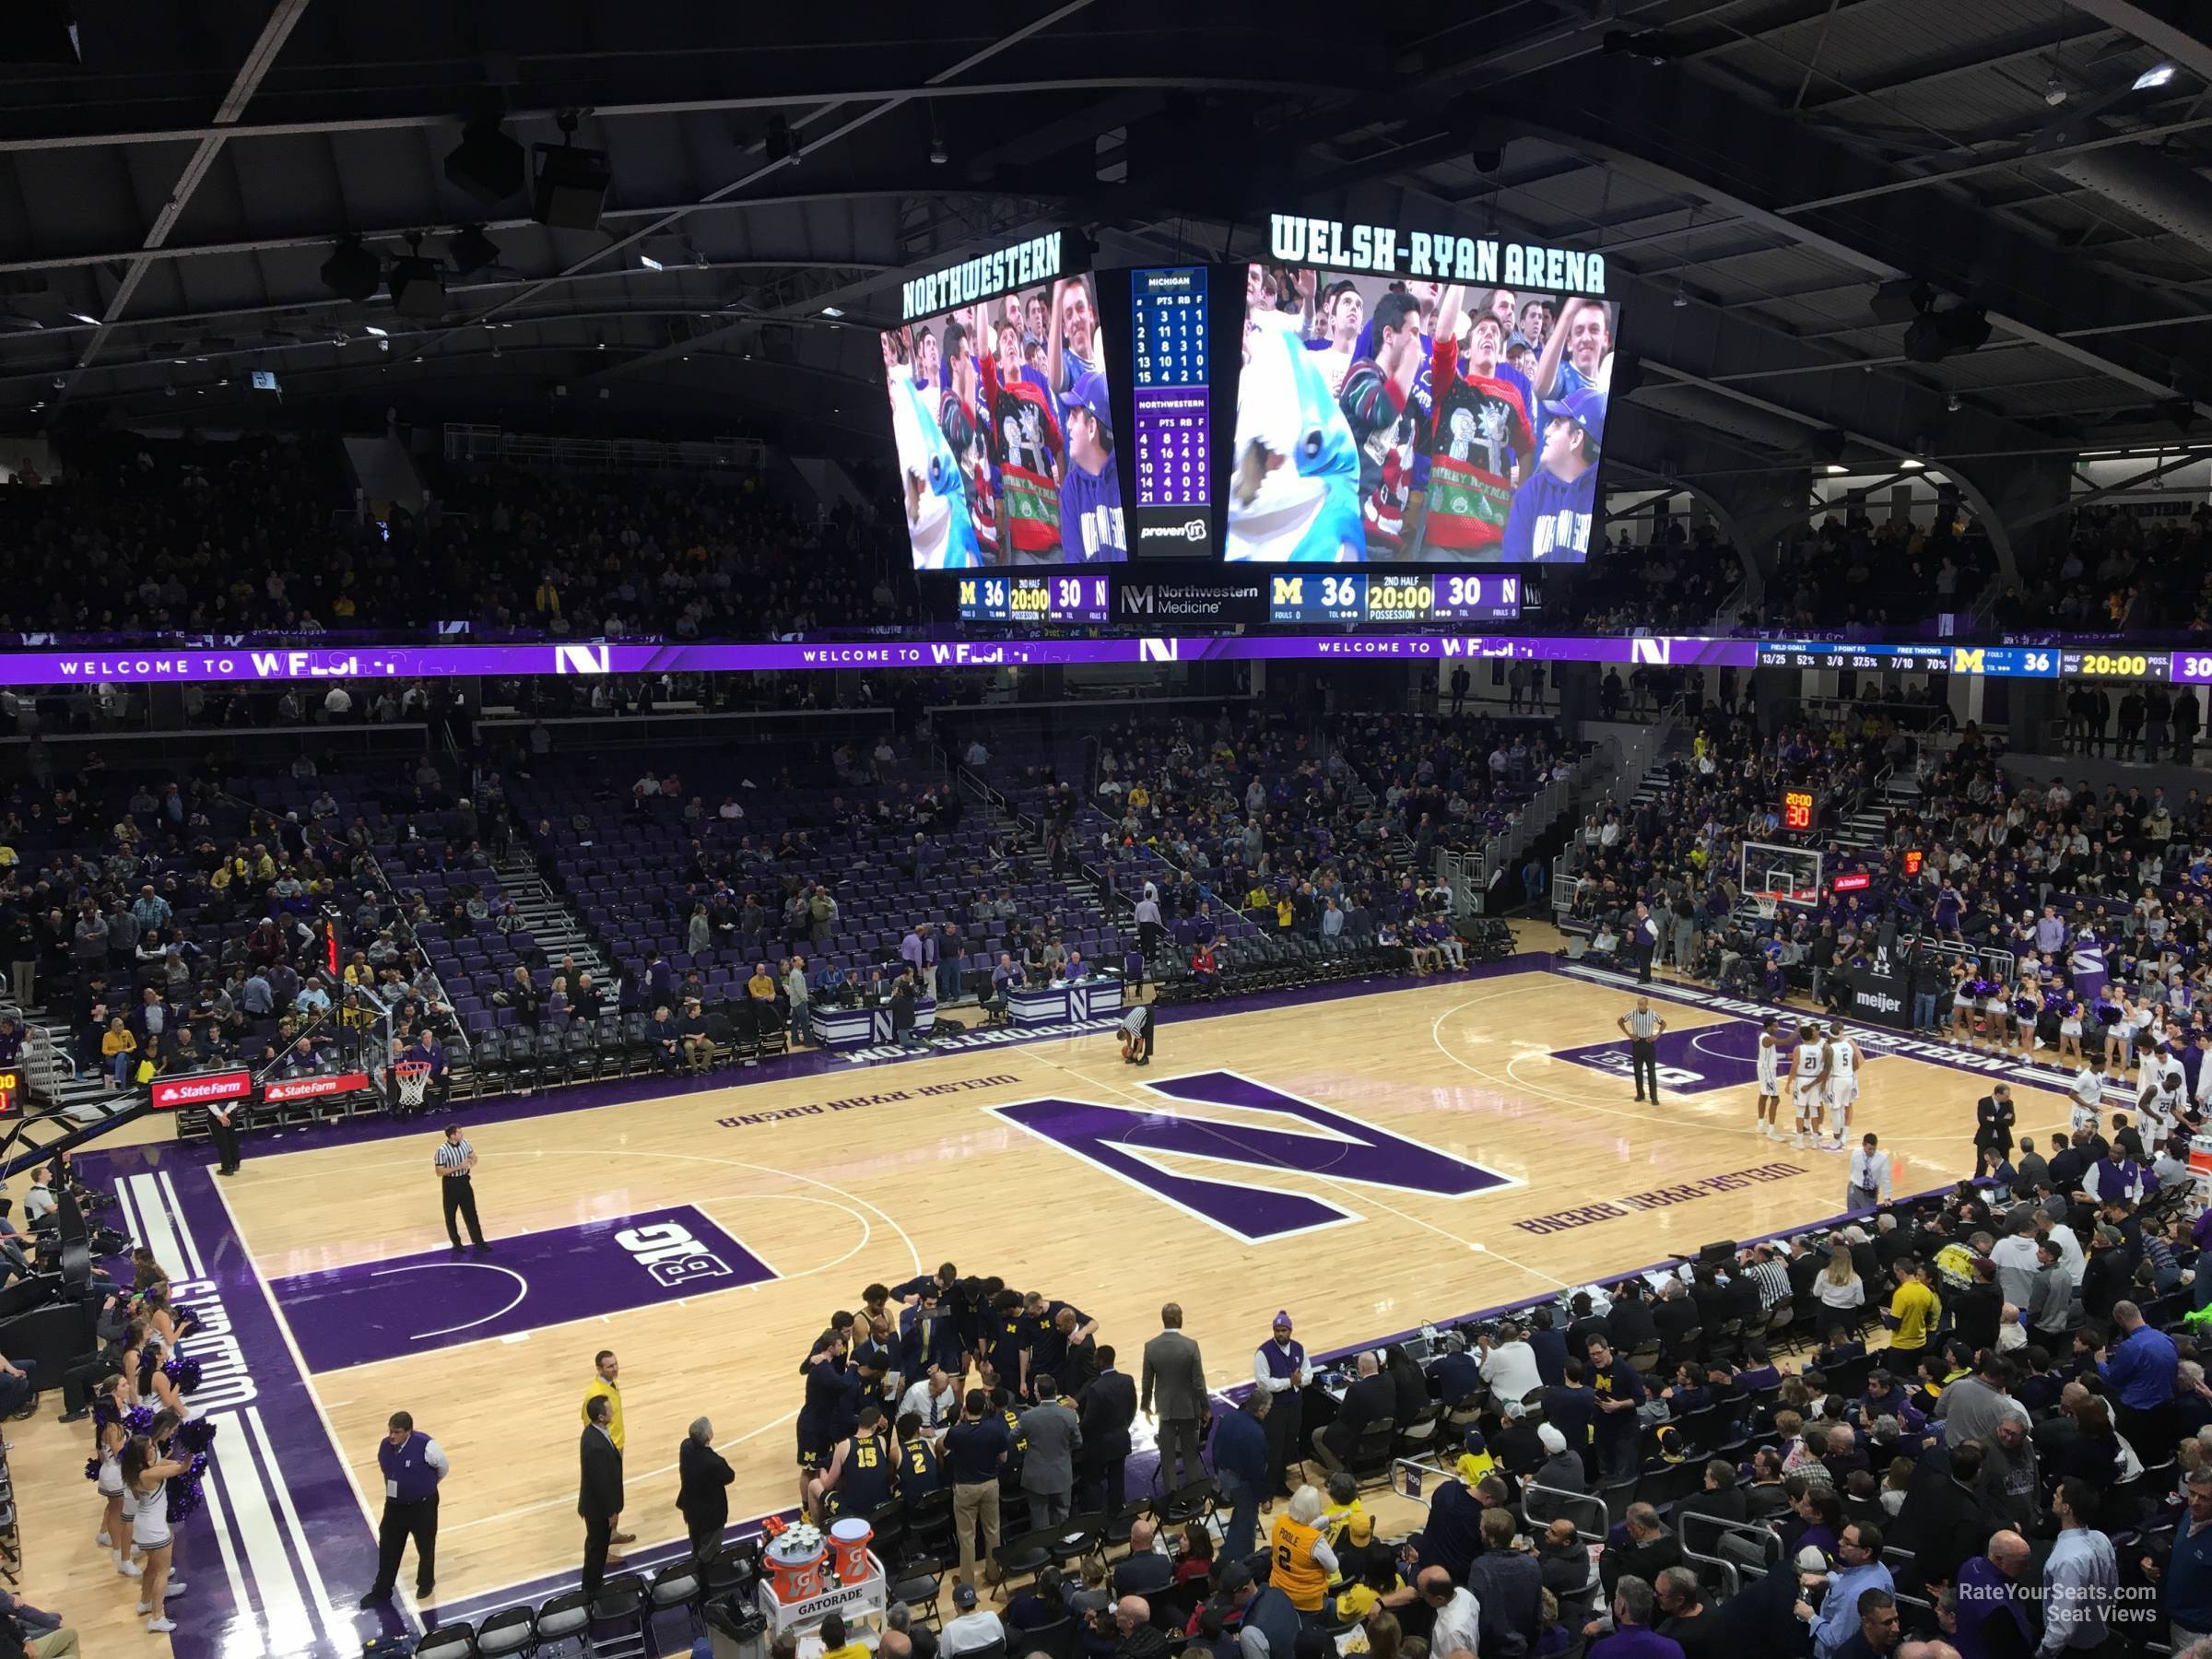 section 210, row 1 seat view  - welsh-ryan arena